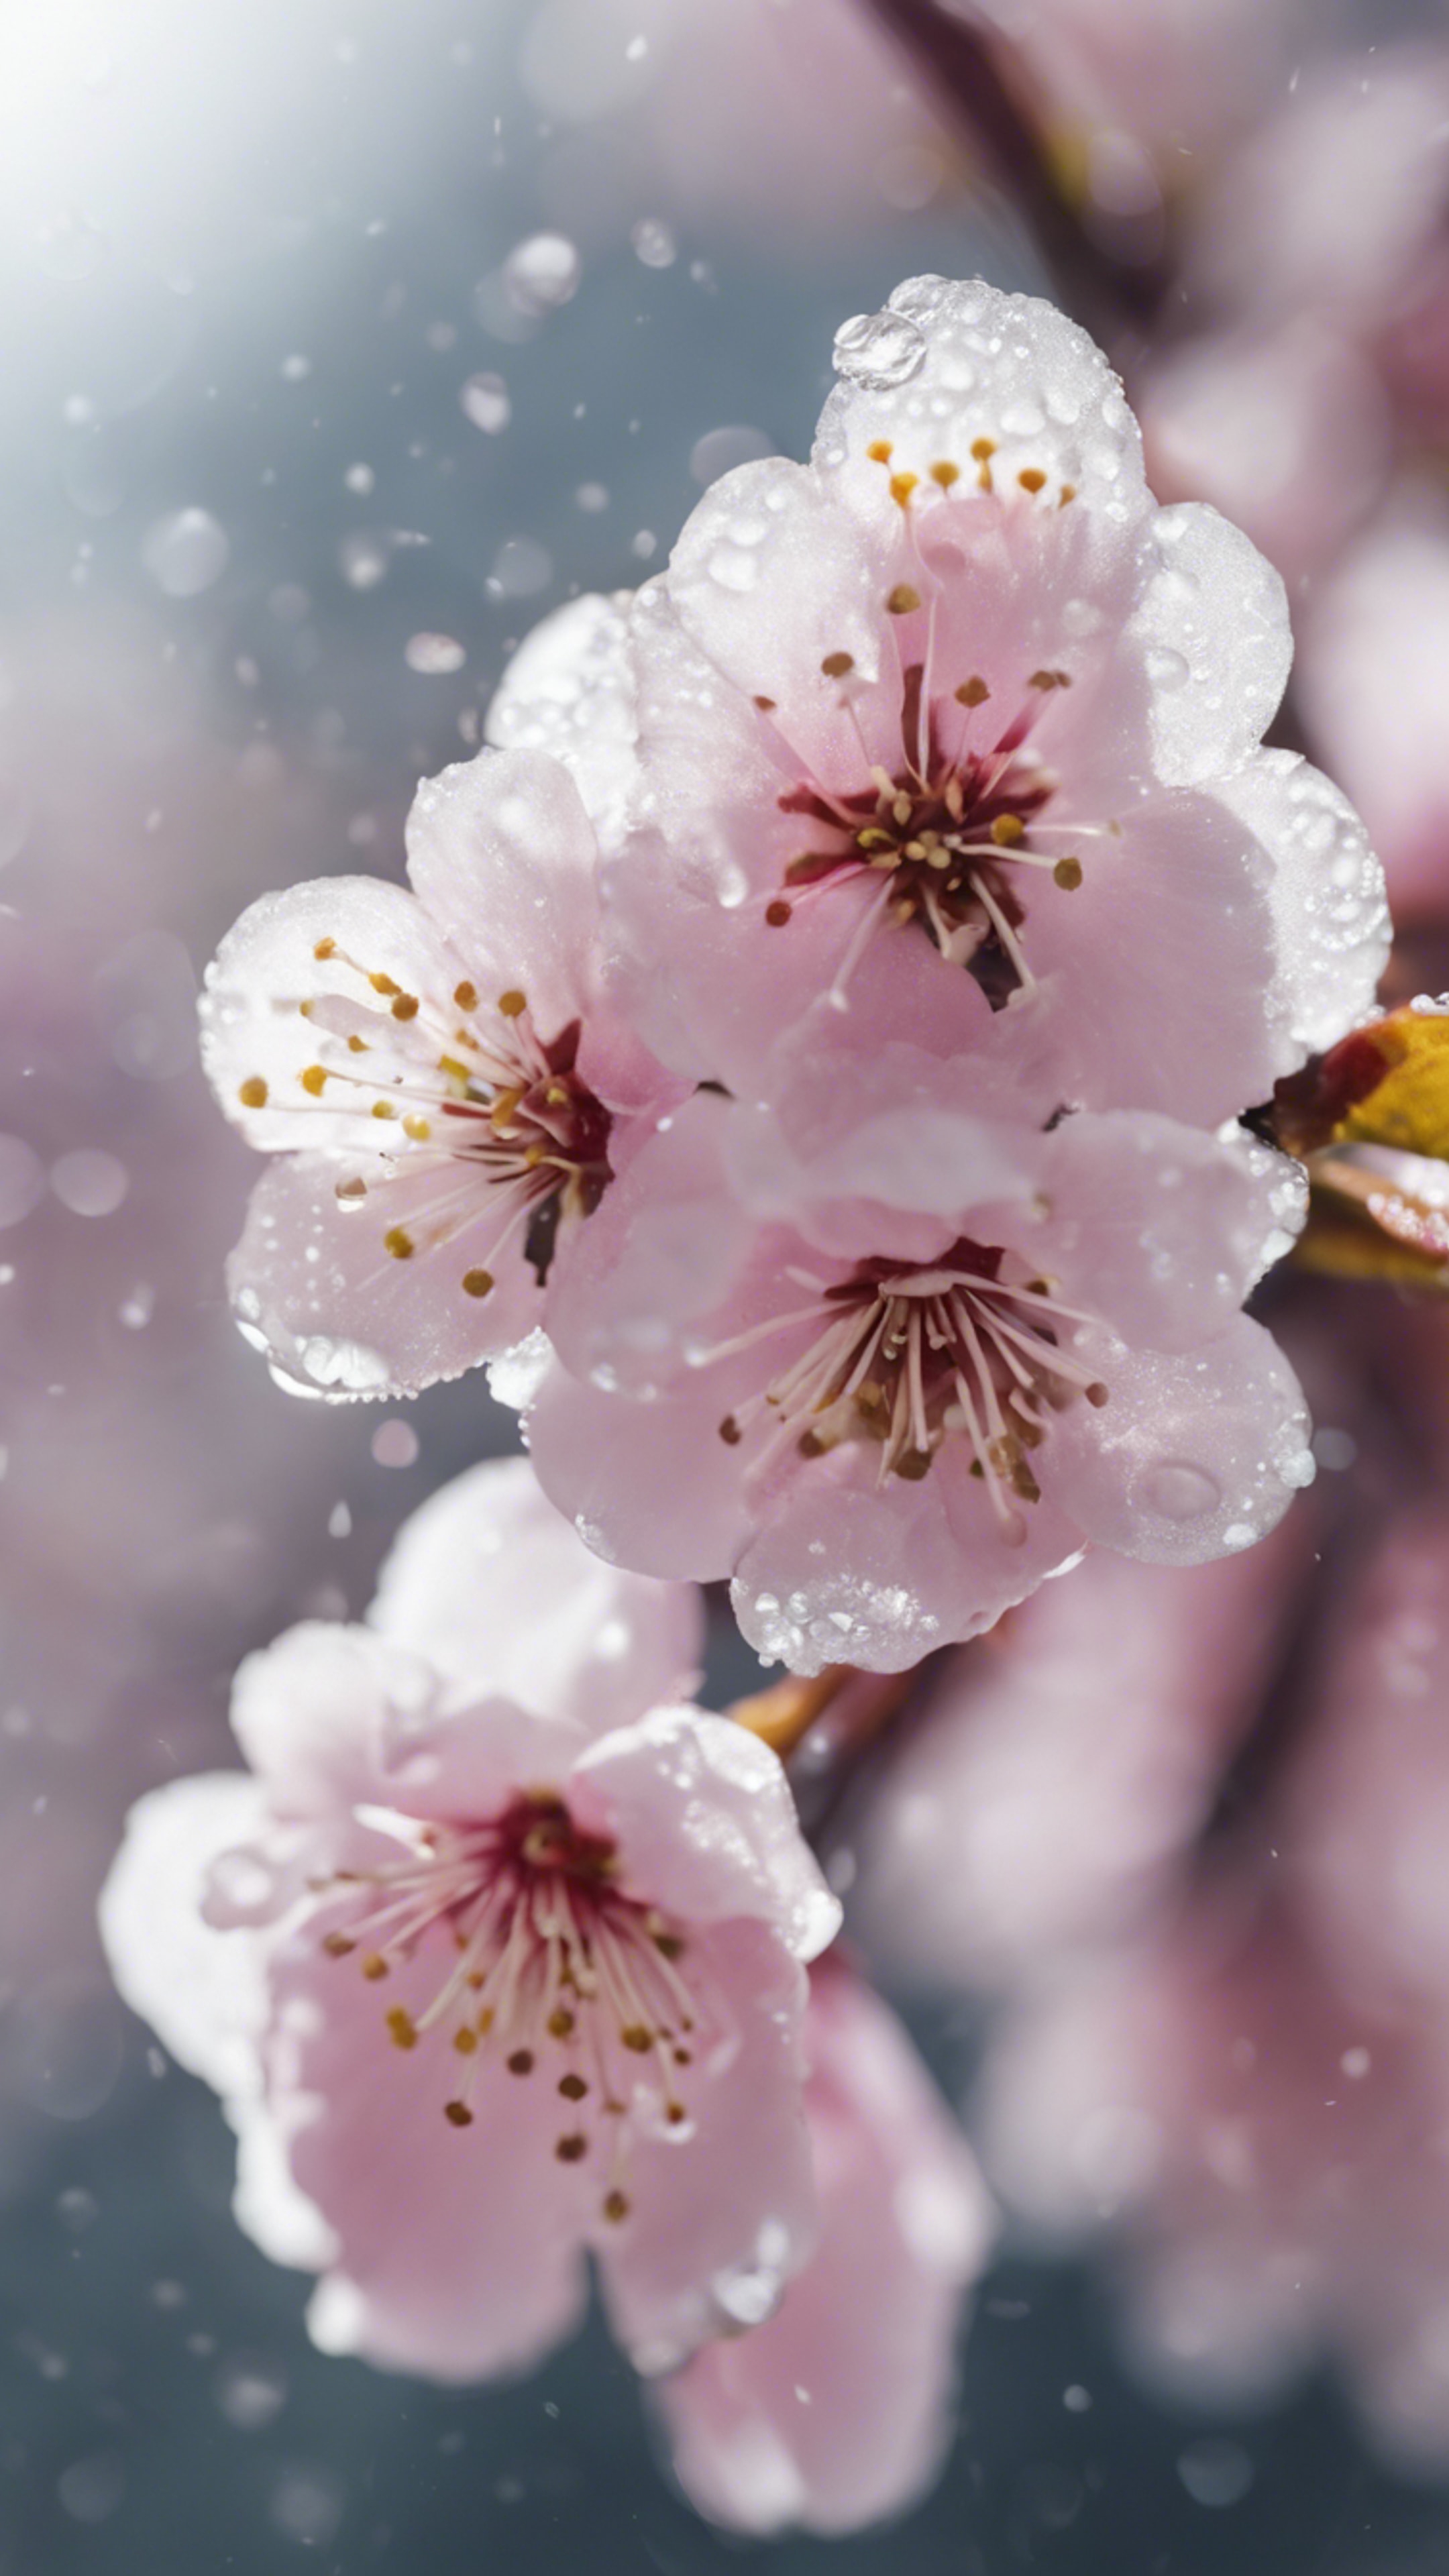 A closeup image of a freshly blooming cherry blossom, speckled with dew drops. 牆紙[d7e9cc65cc424f509aa2]